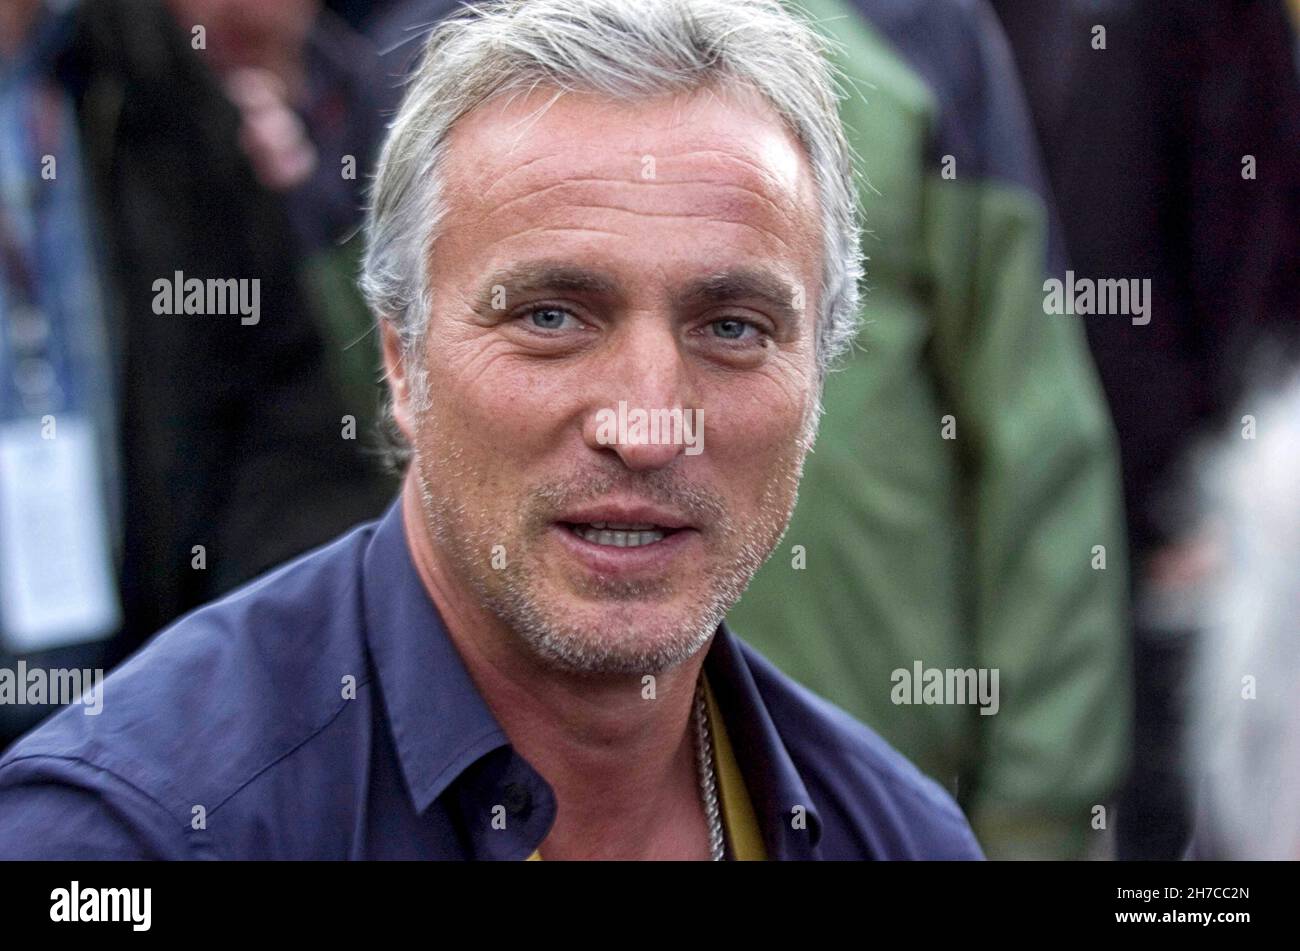 Former French footballer David Ginola attending the Ryder Cup at the Celtic Manor in Newport, UK in 2010. Stock Photo